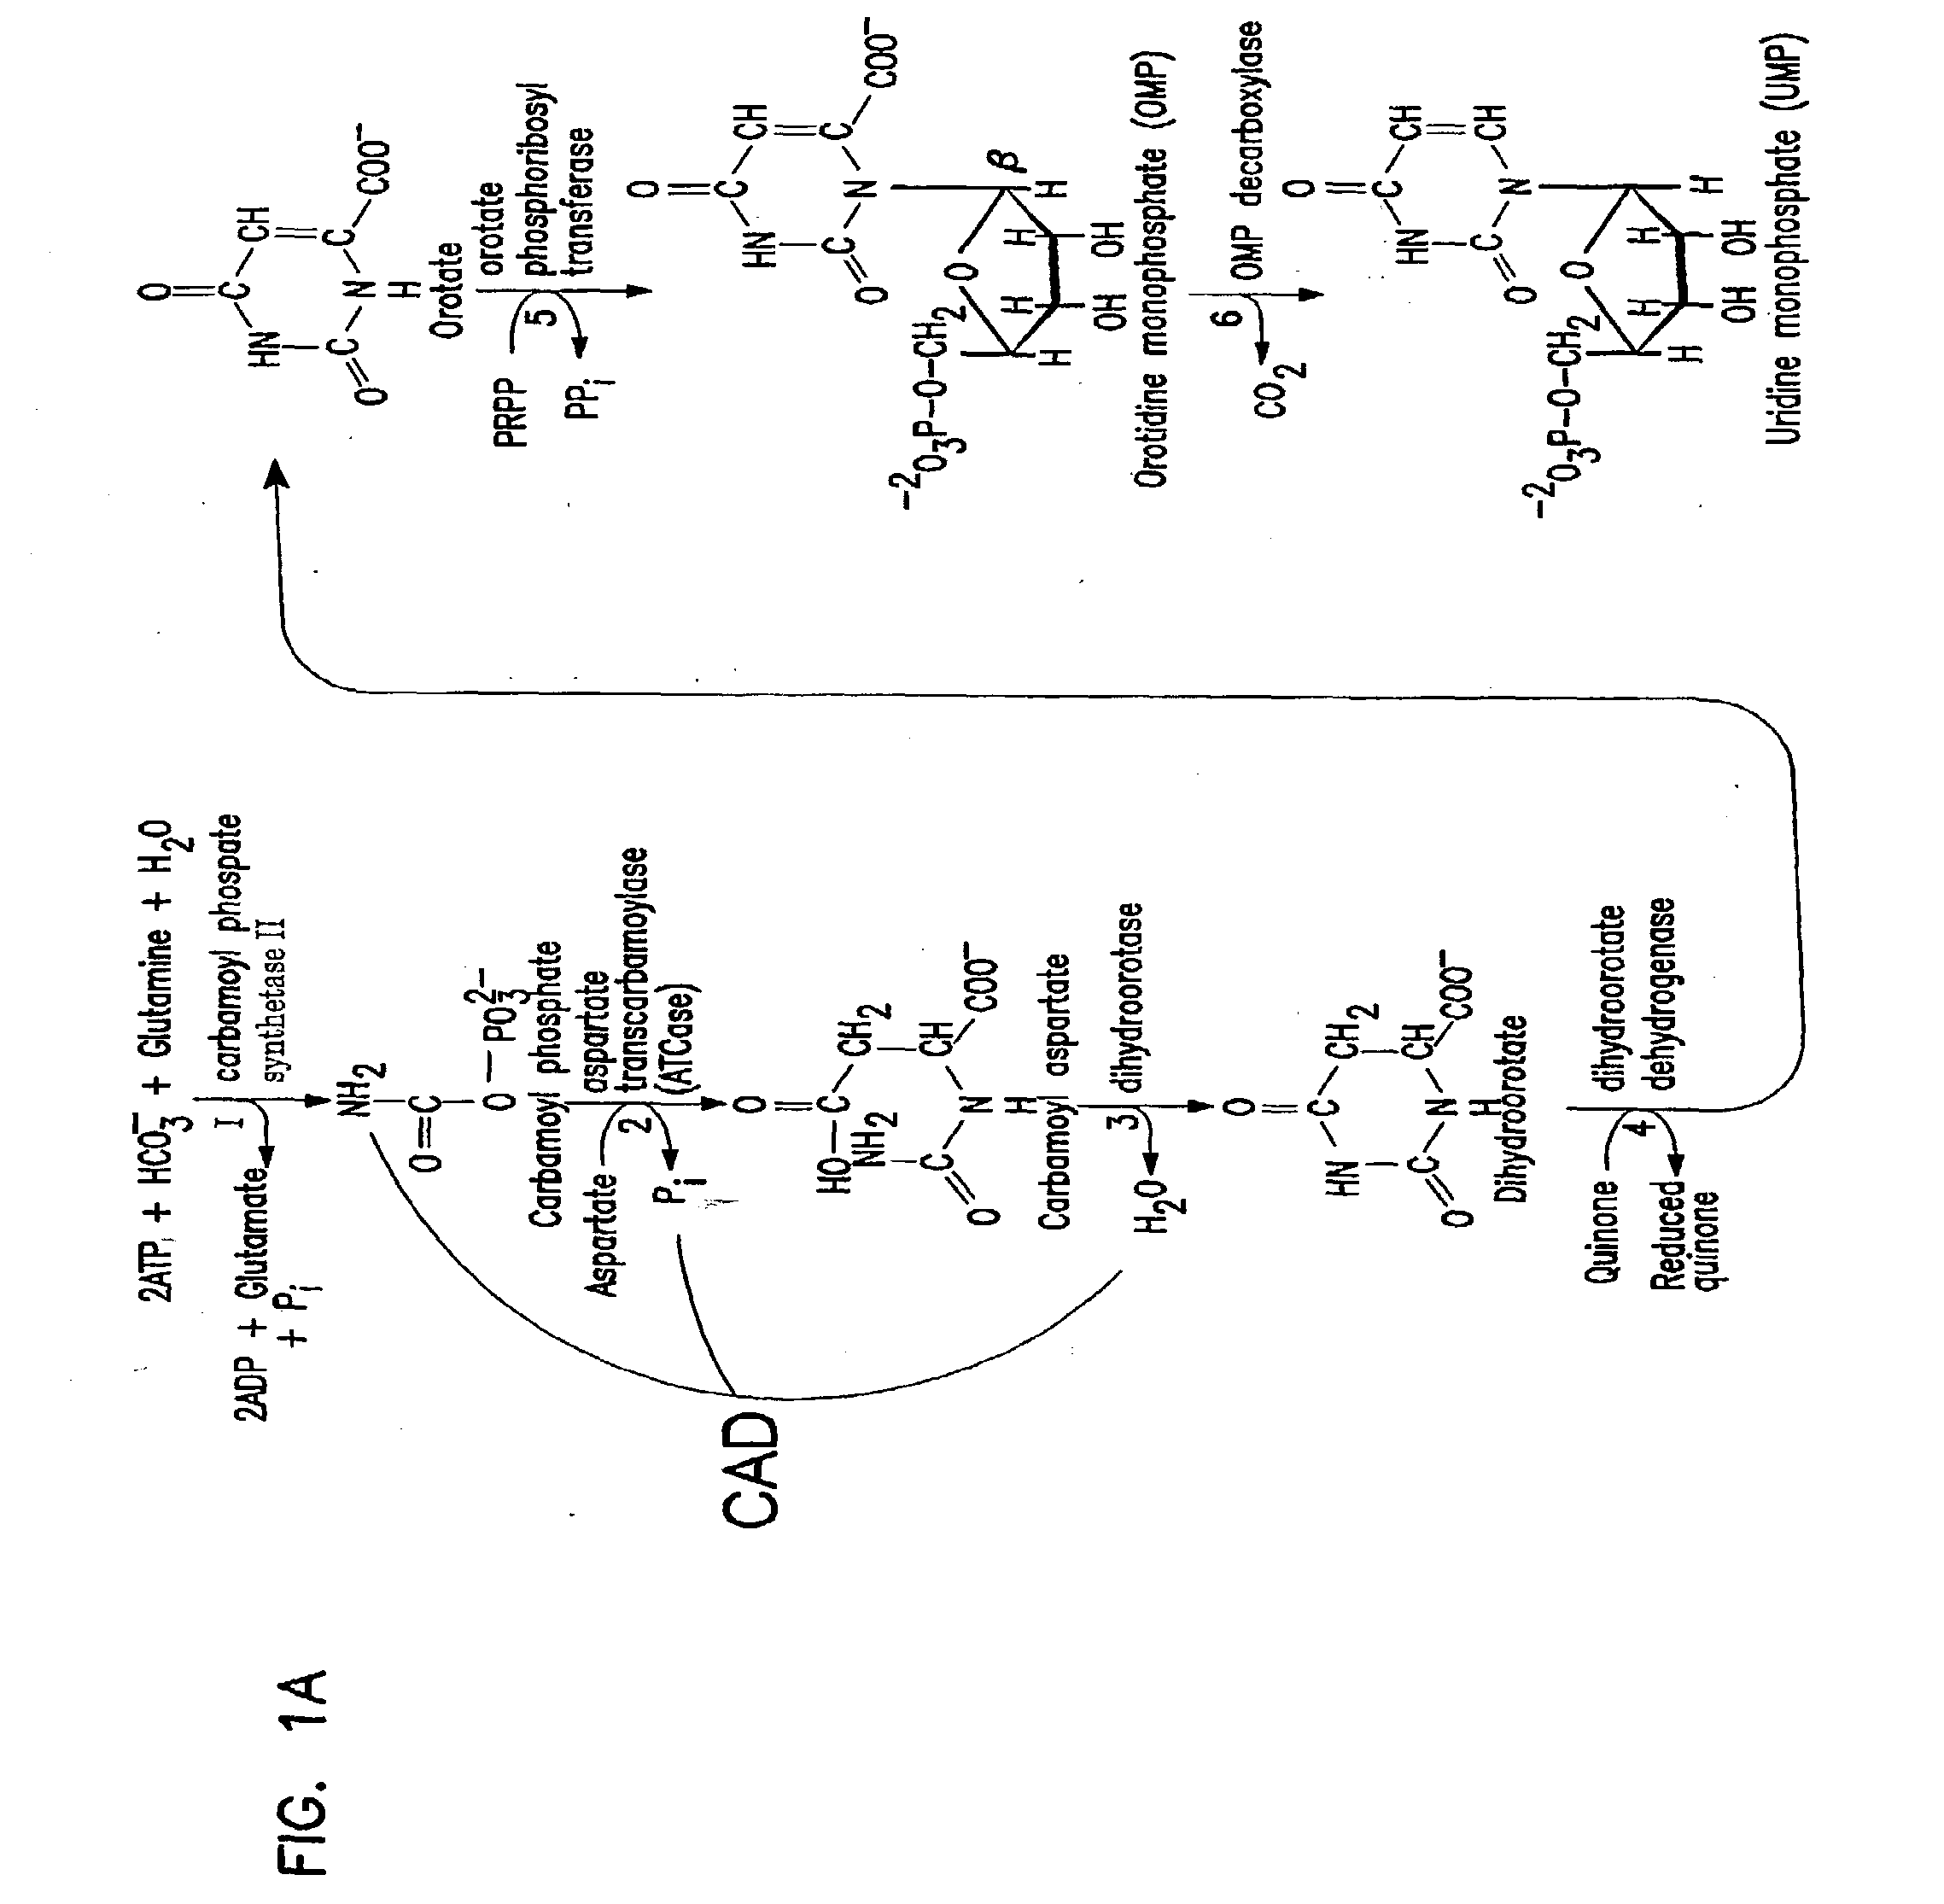 Galactosylation of Recombinant Glycoproteins